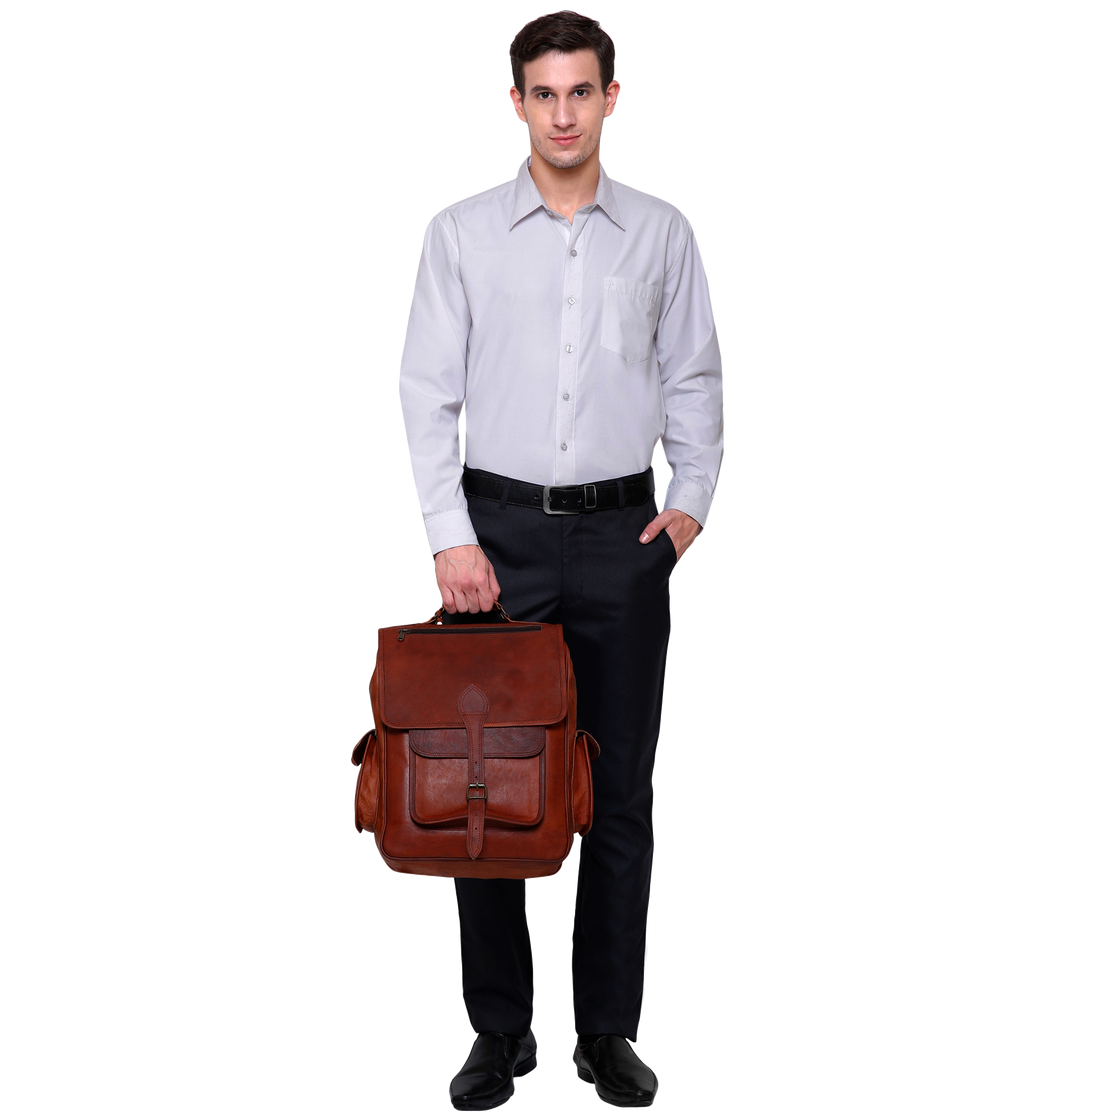 Hughes Rustic Leather Backpack  Leather Laptop Backpack — Classy Leather  Bags